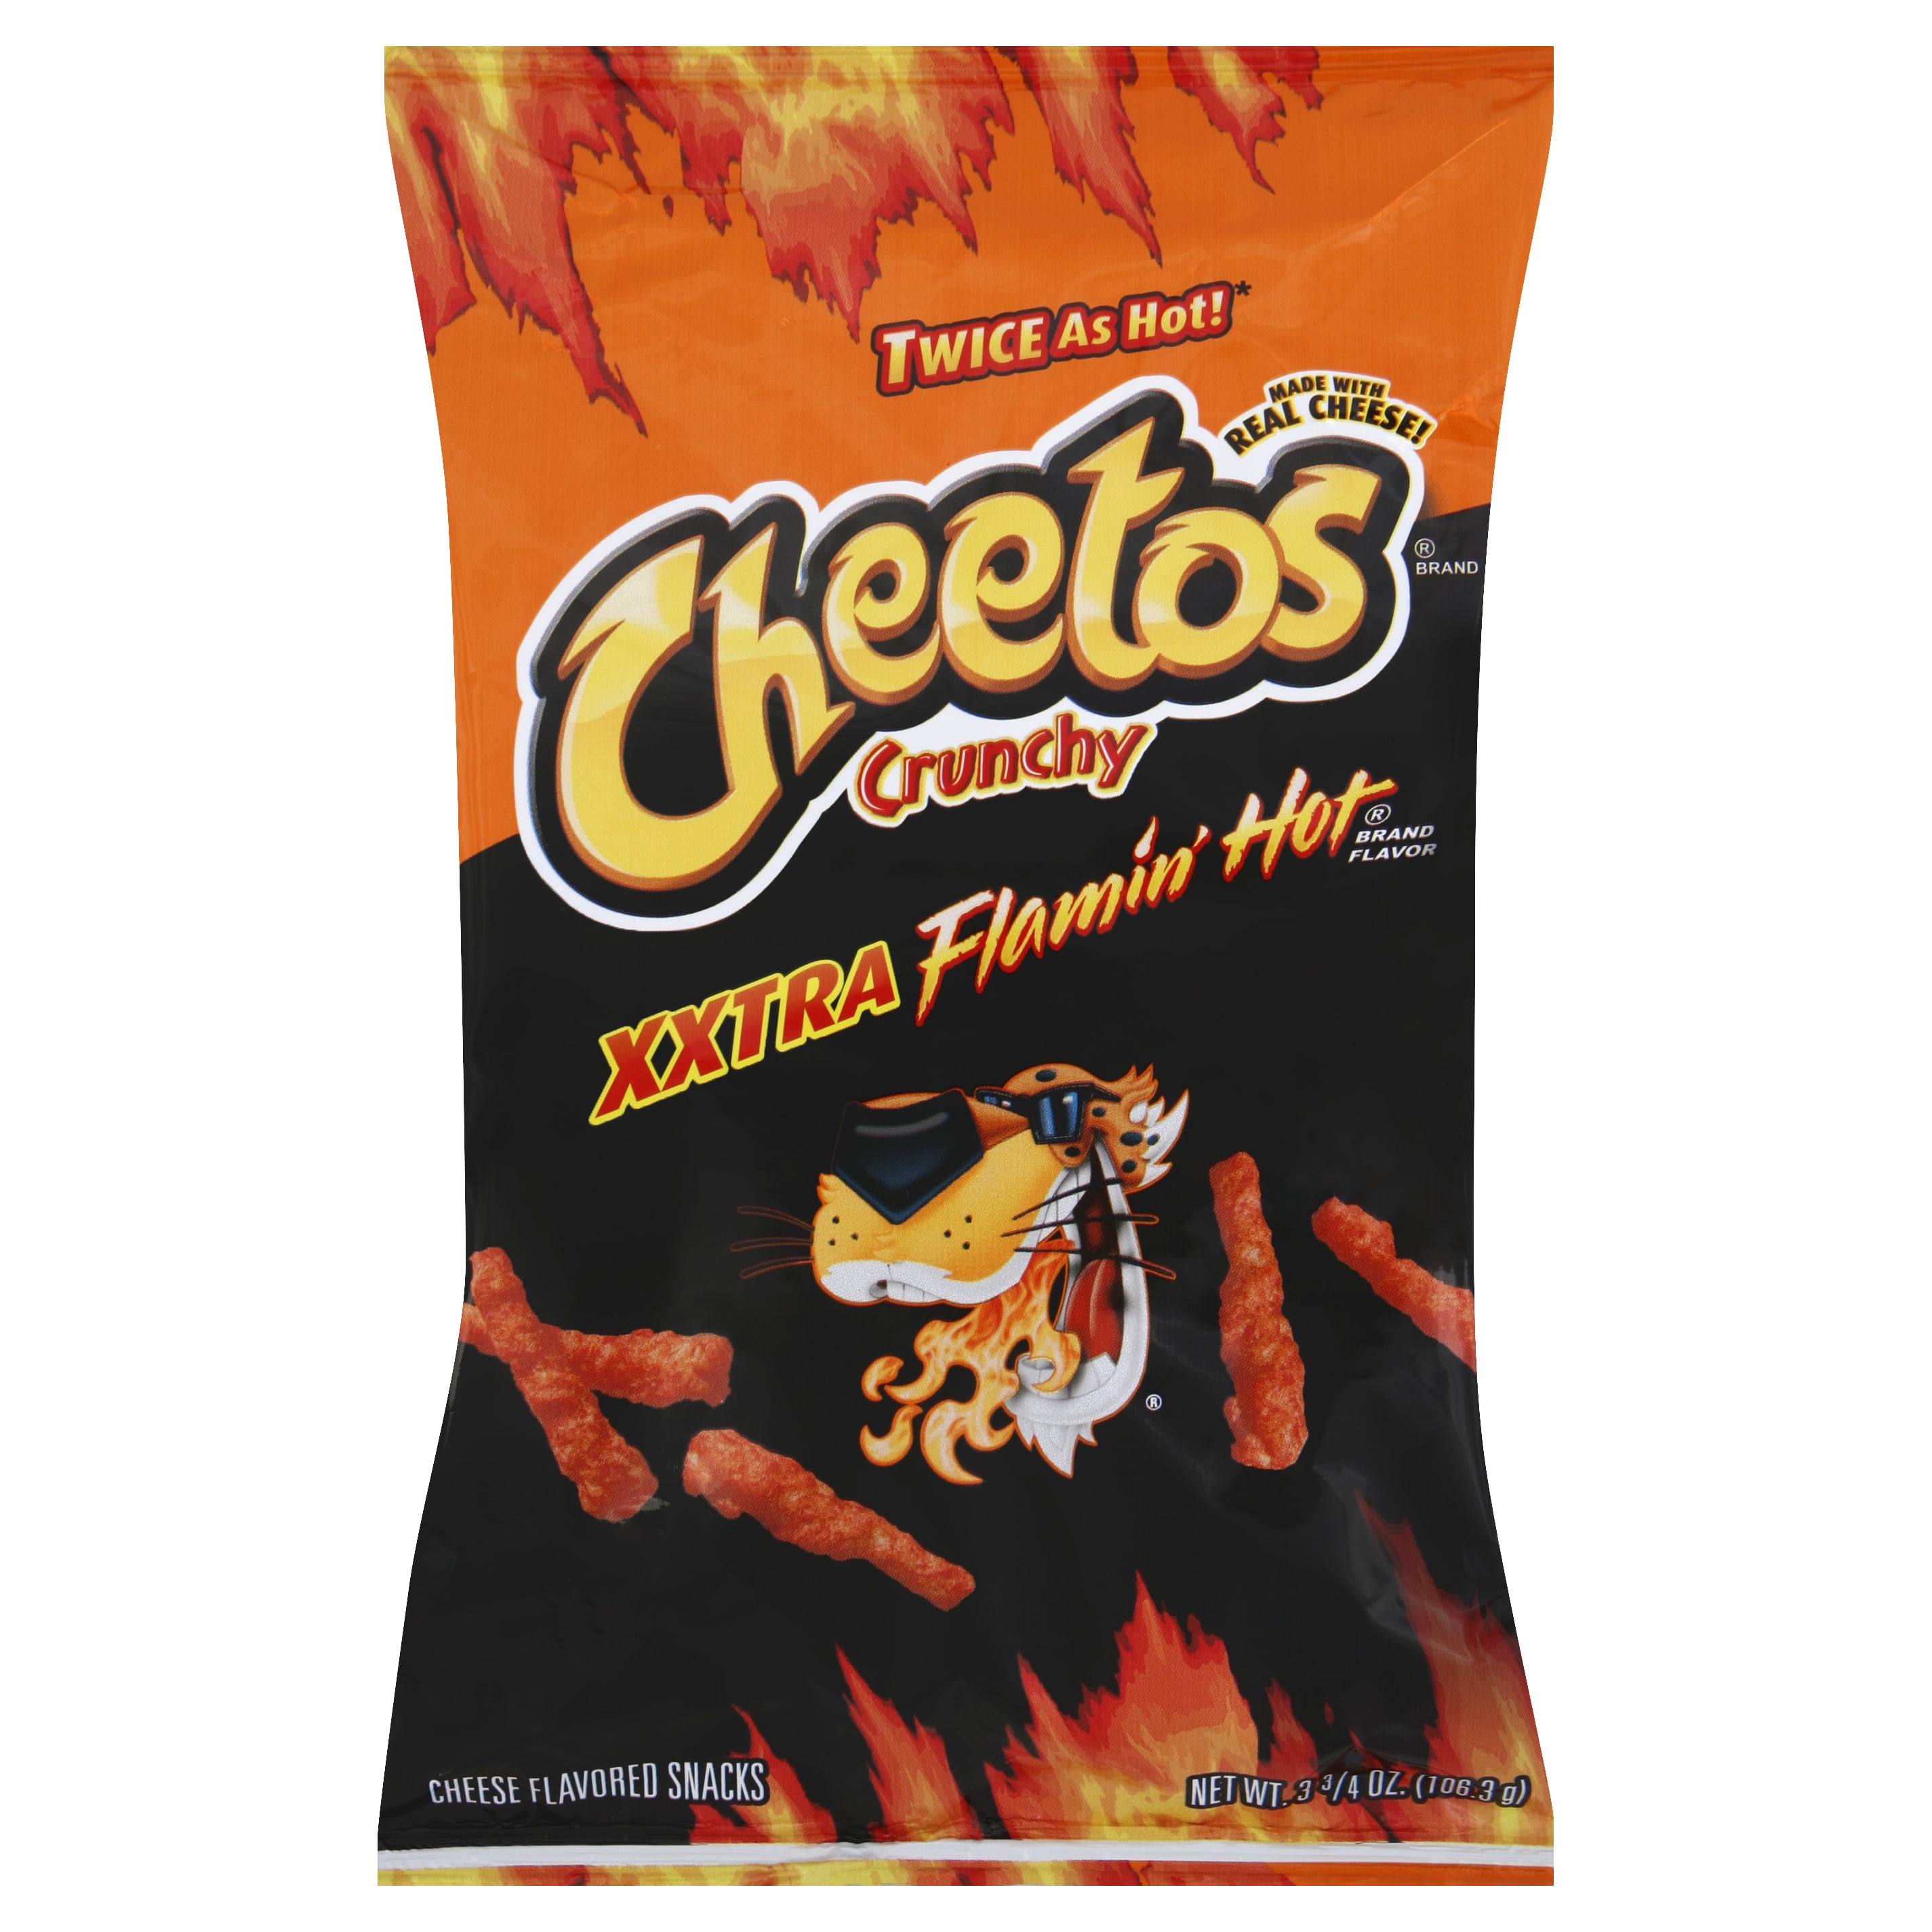 Cheetos Xxtra Flamin Hot Crunchy Special Editions At Usfoodz My Xxx Hot Girl